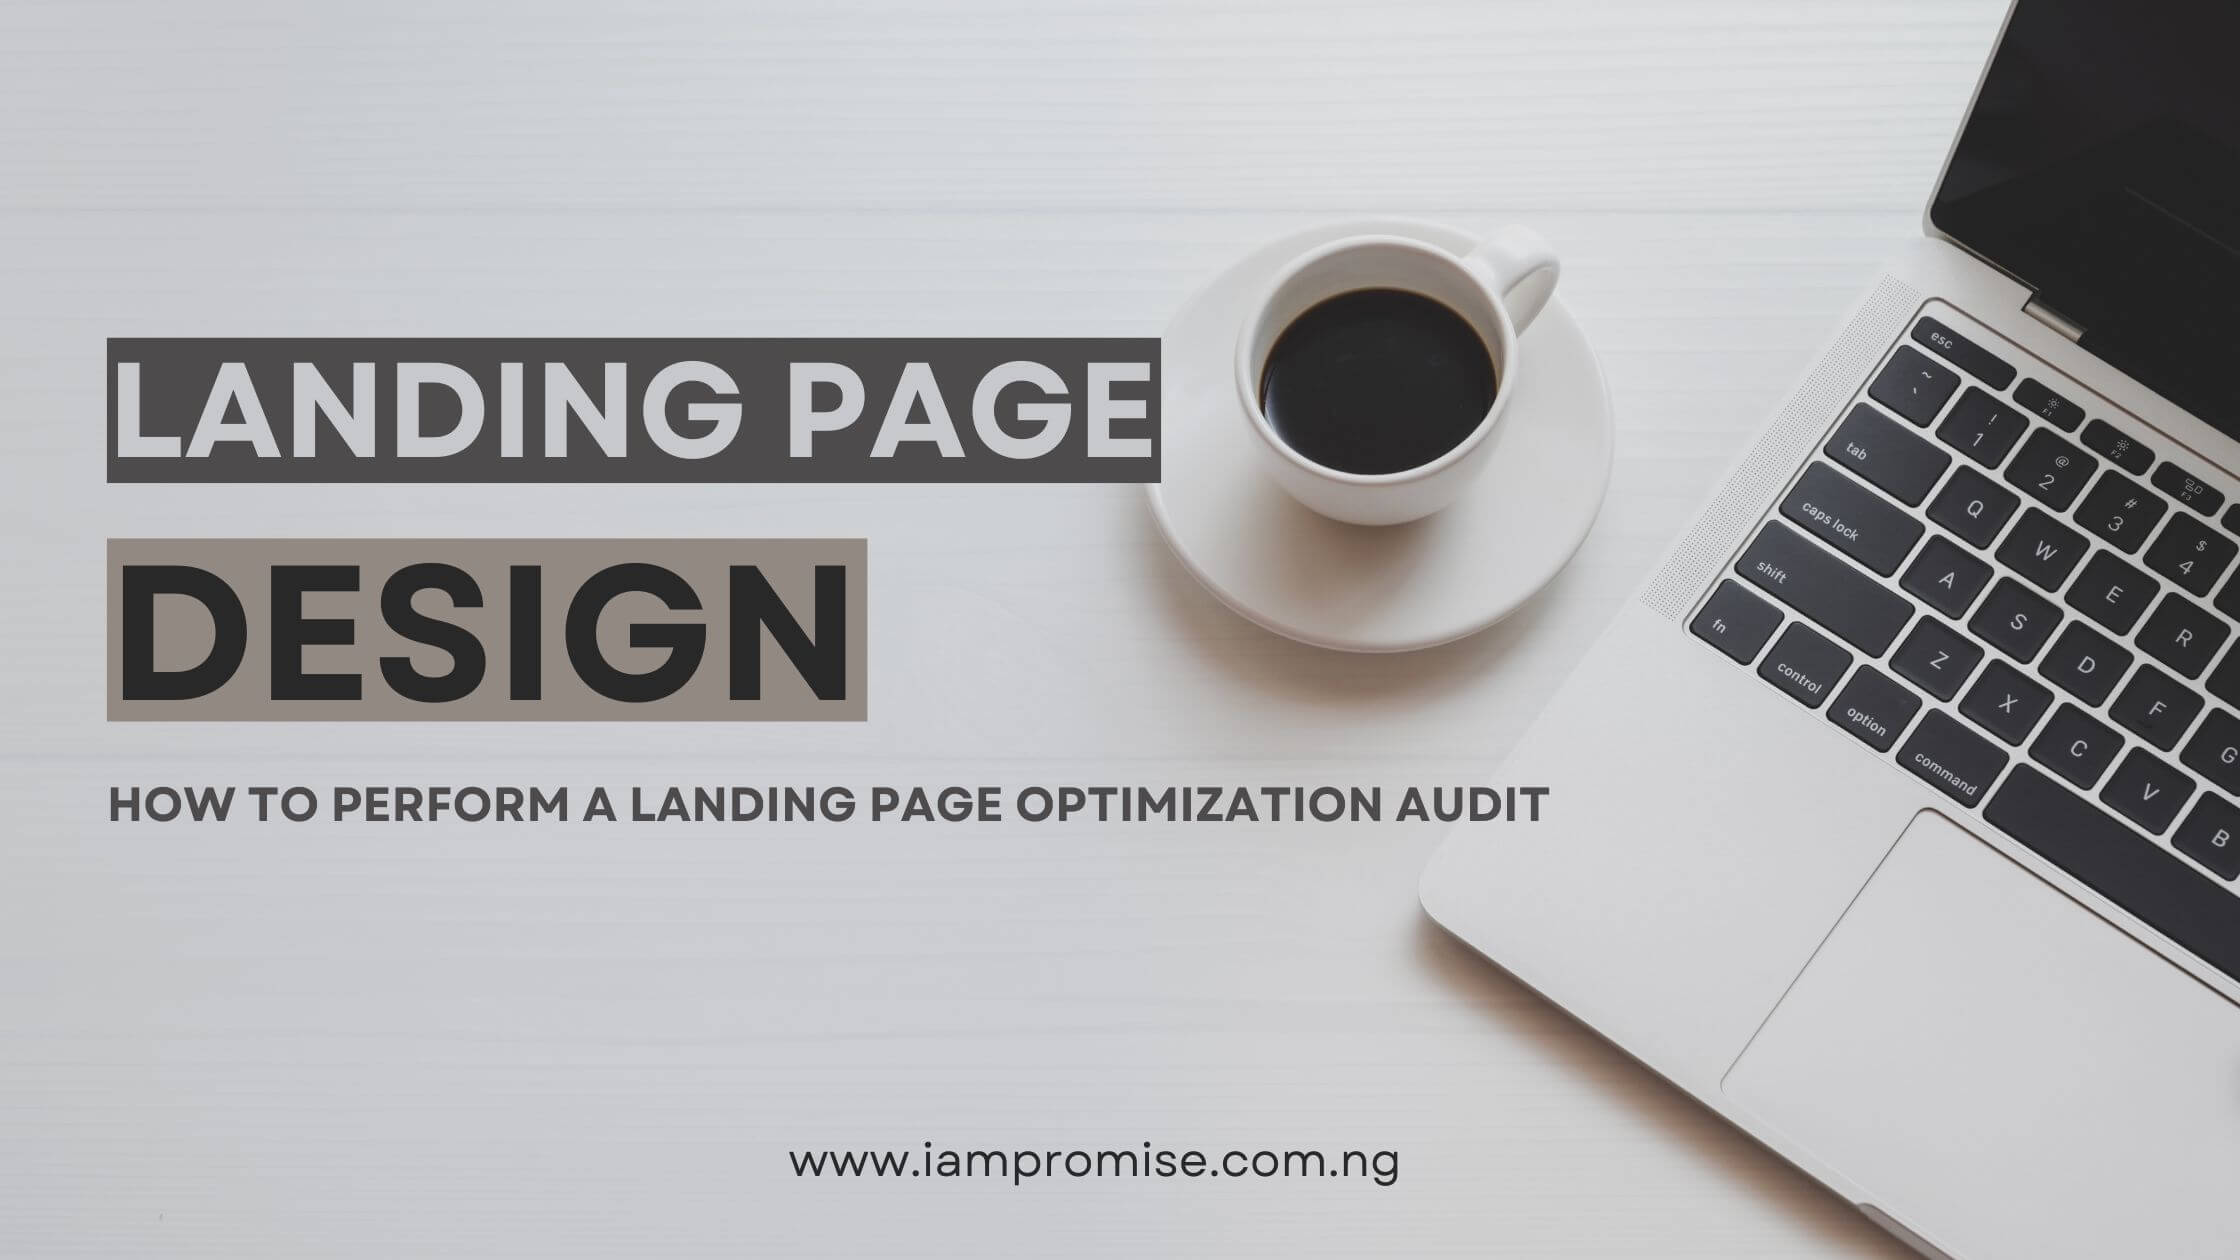 How to perform a landing page optimization audit